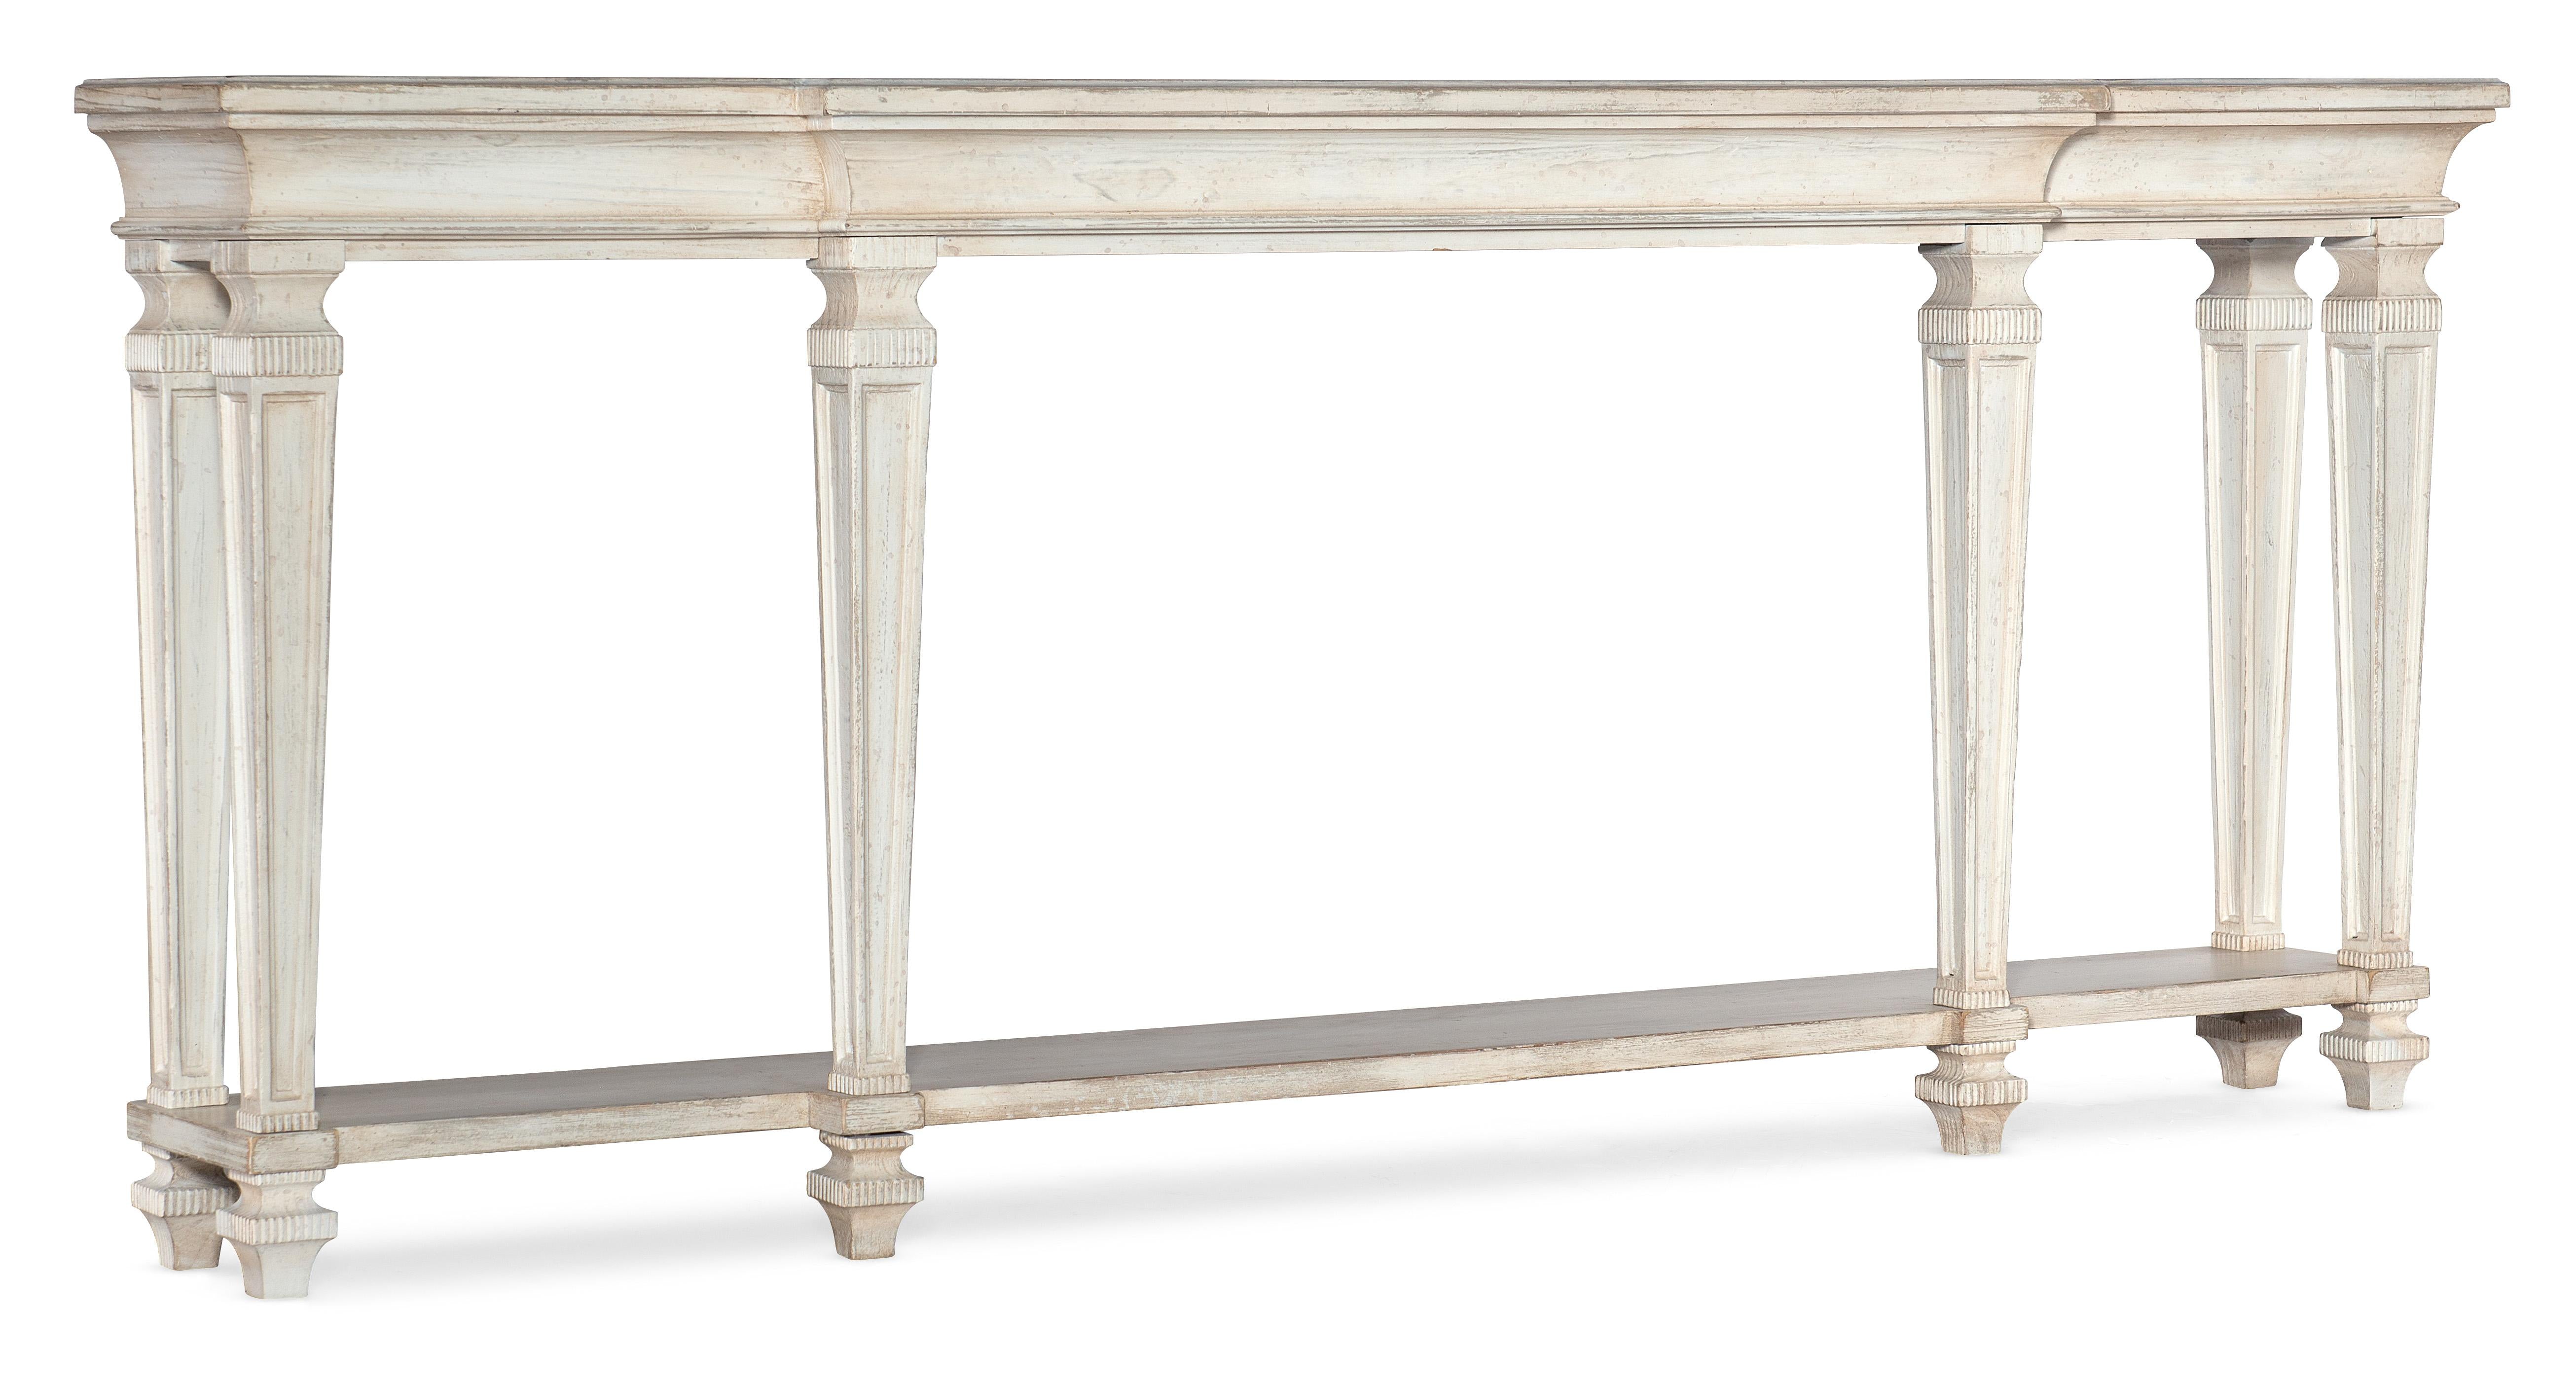 Traditions Console Table - 5961-80161-02